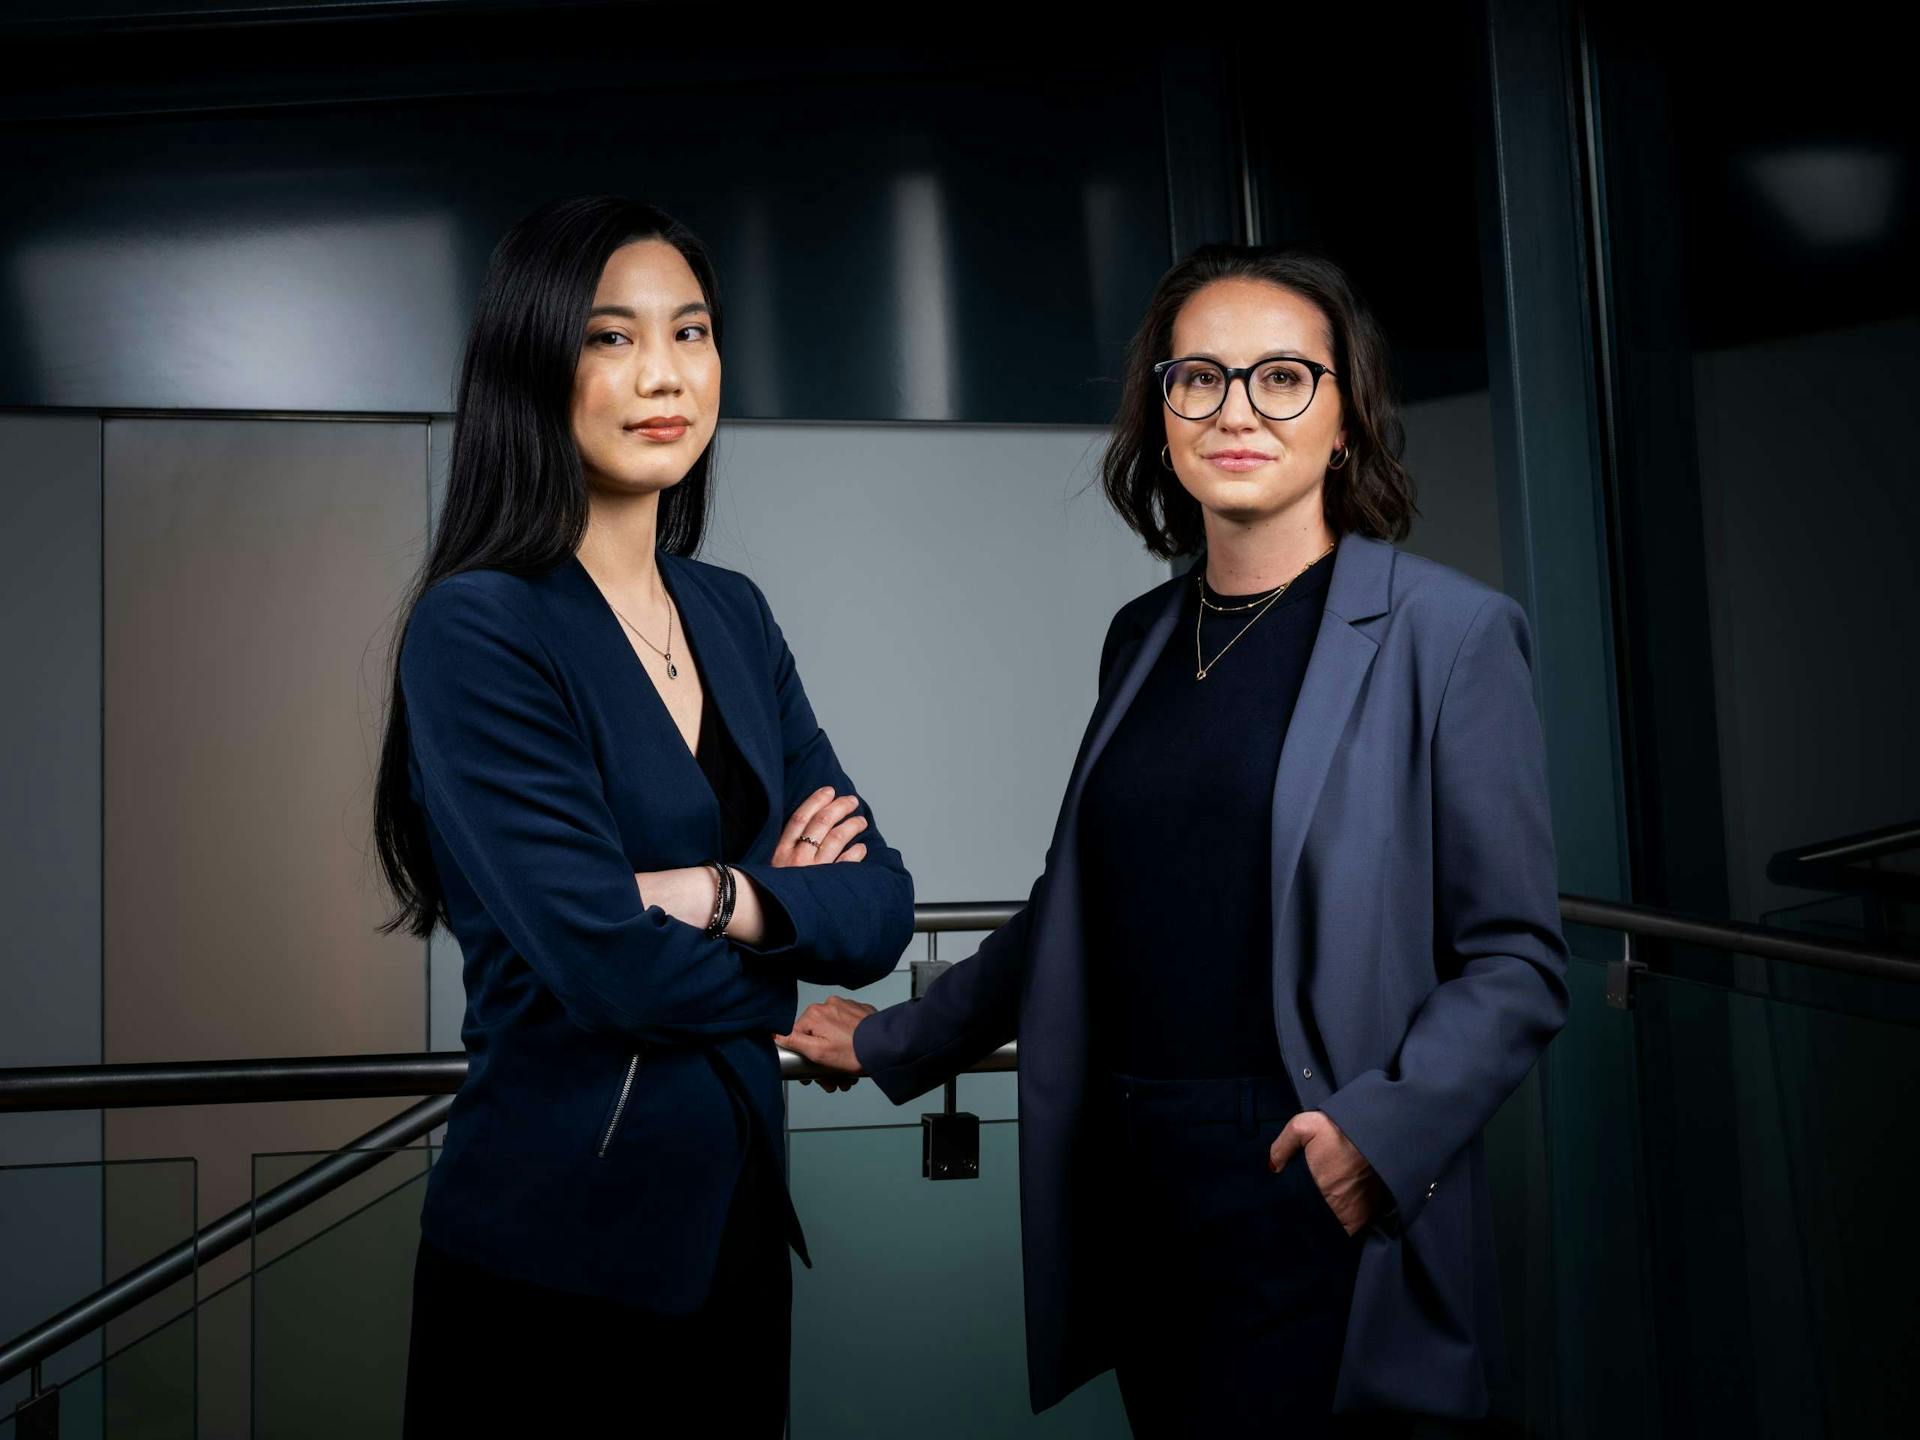 Jacqueline Bichler and Alice An are now attorneys at law at STADLER VÖLKEL attorneys at law